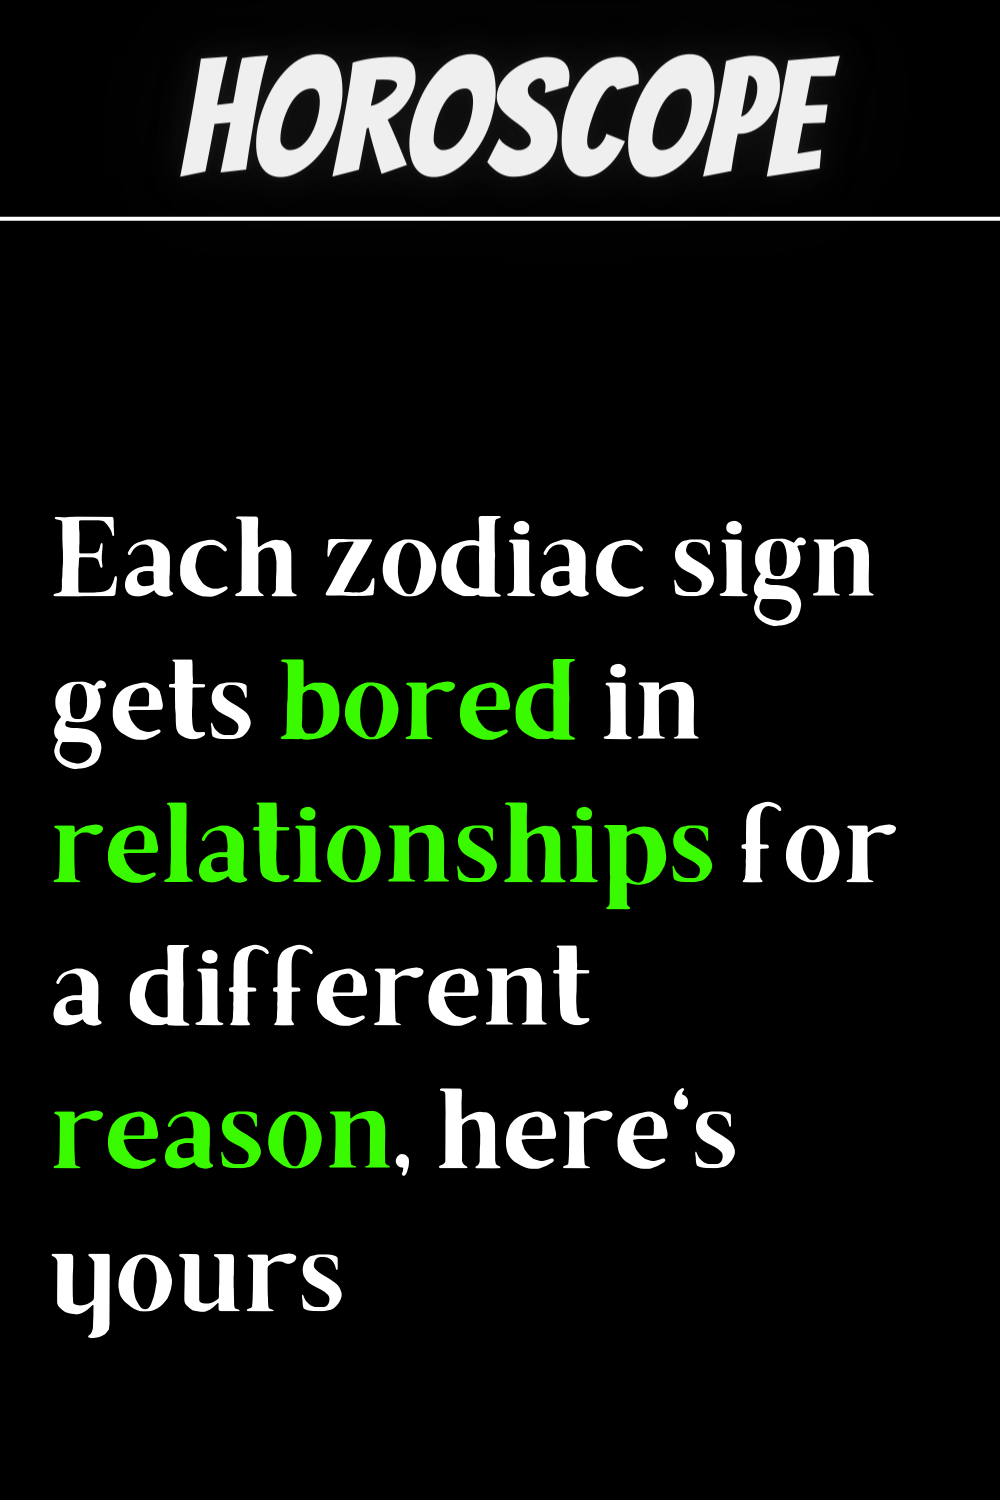 Each zodiac sign gets bored in relationships for a different reason, here's yours